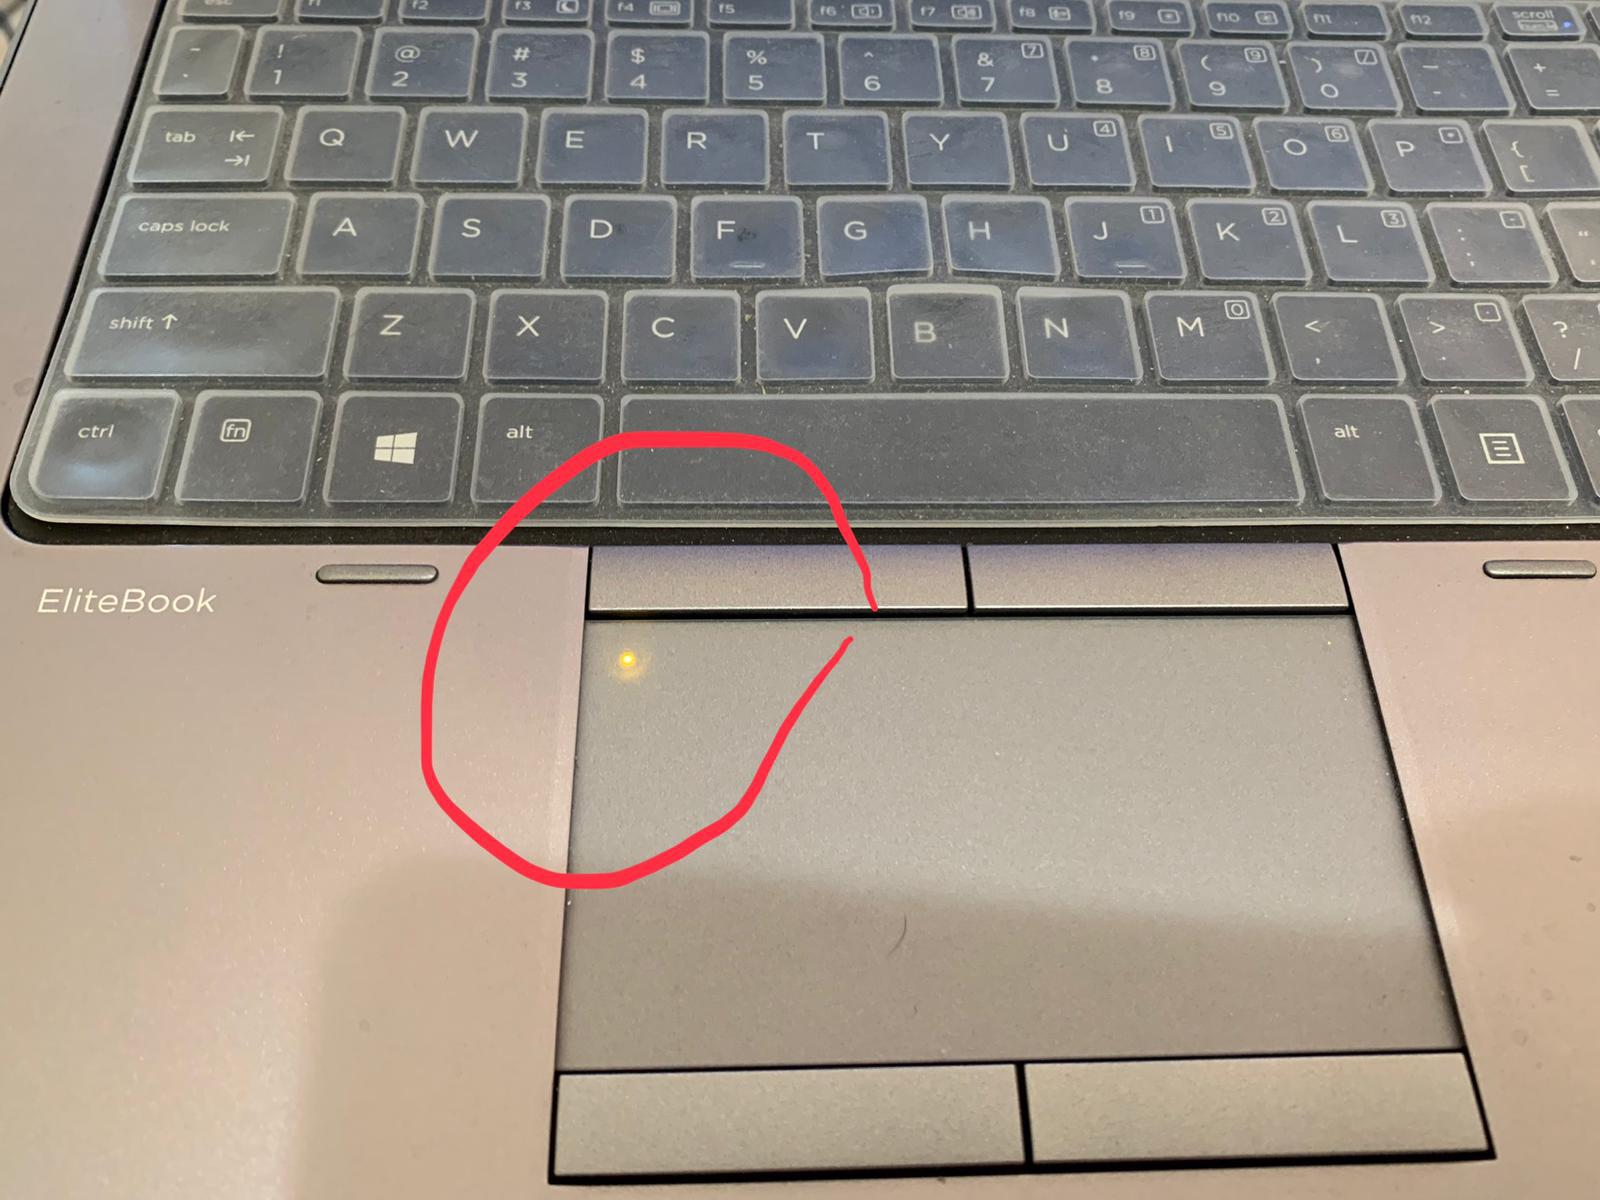 why are there a yellow light was on the writing pad - HP Support Community  - 7248220